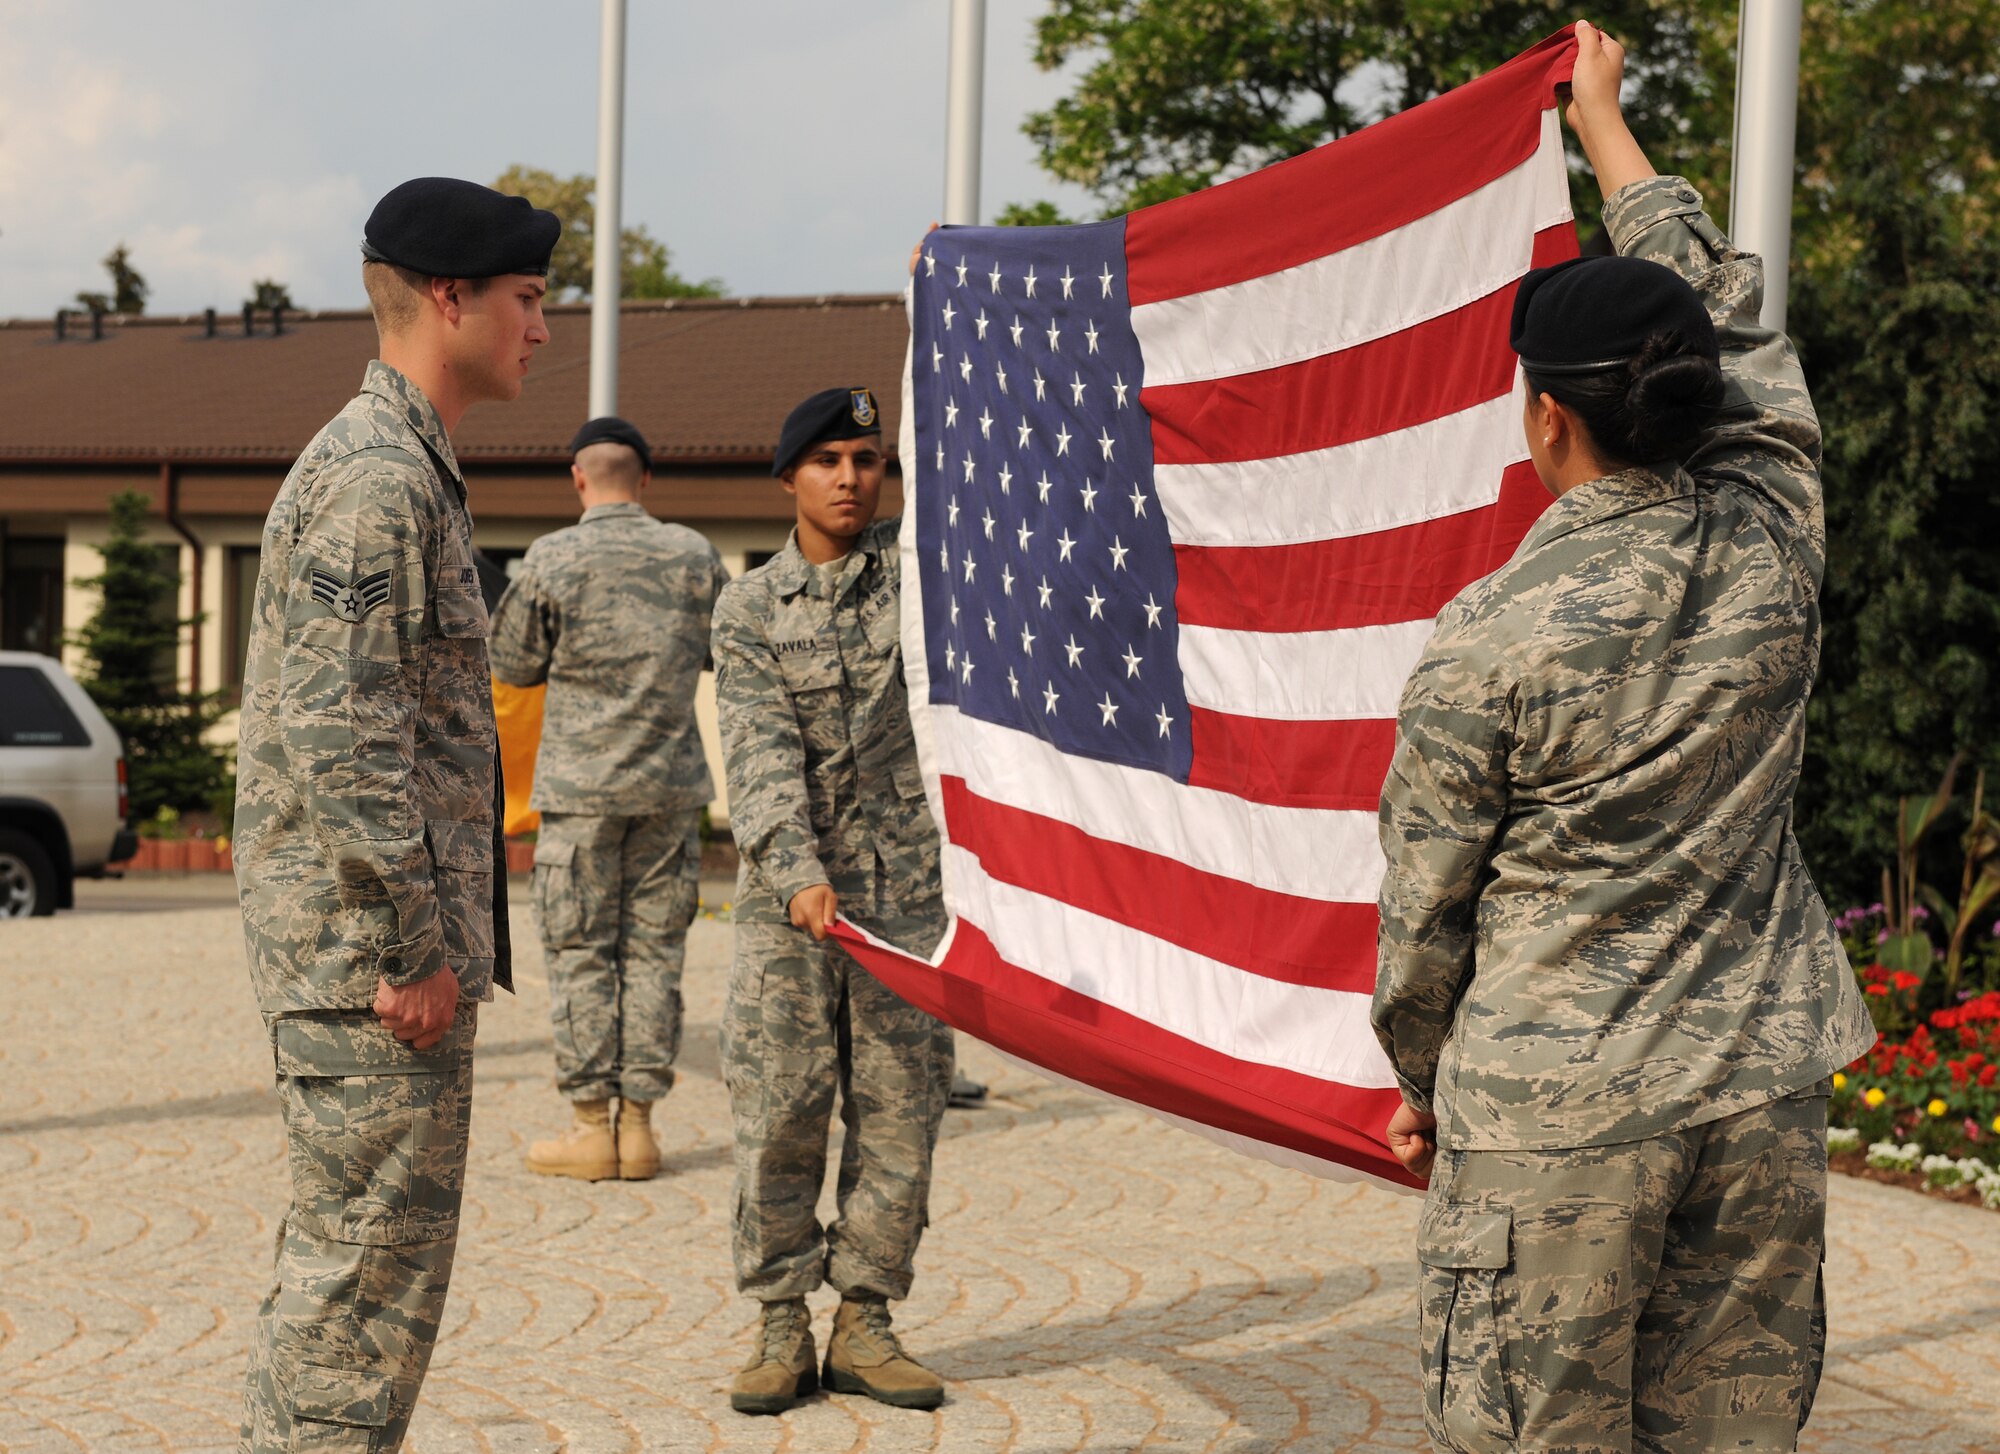 SPANGDAHLEM AIR BASE, Germany – Airmen from the 52nd Security Forces Squadron fold the German and U.S. flags during a retreat ceremony here May 20. The retreat ceremony coincided with National Police Week, which honors law enforcement members who have lost their lives in the line of duty for the safety and protection of others. (U.S. Air Force photo/Senior Airman Nathanael Callon)